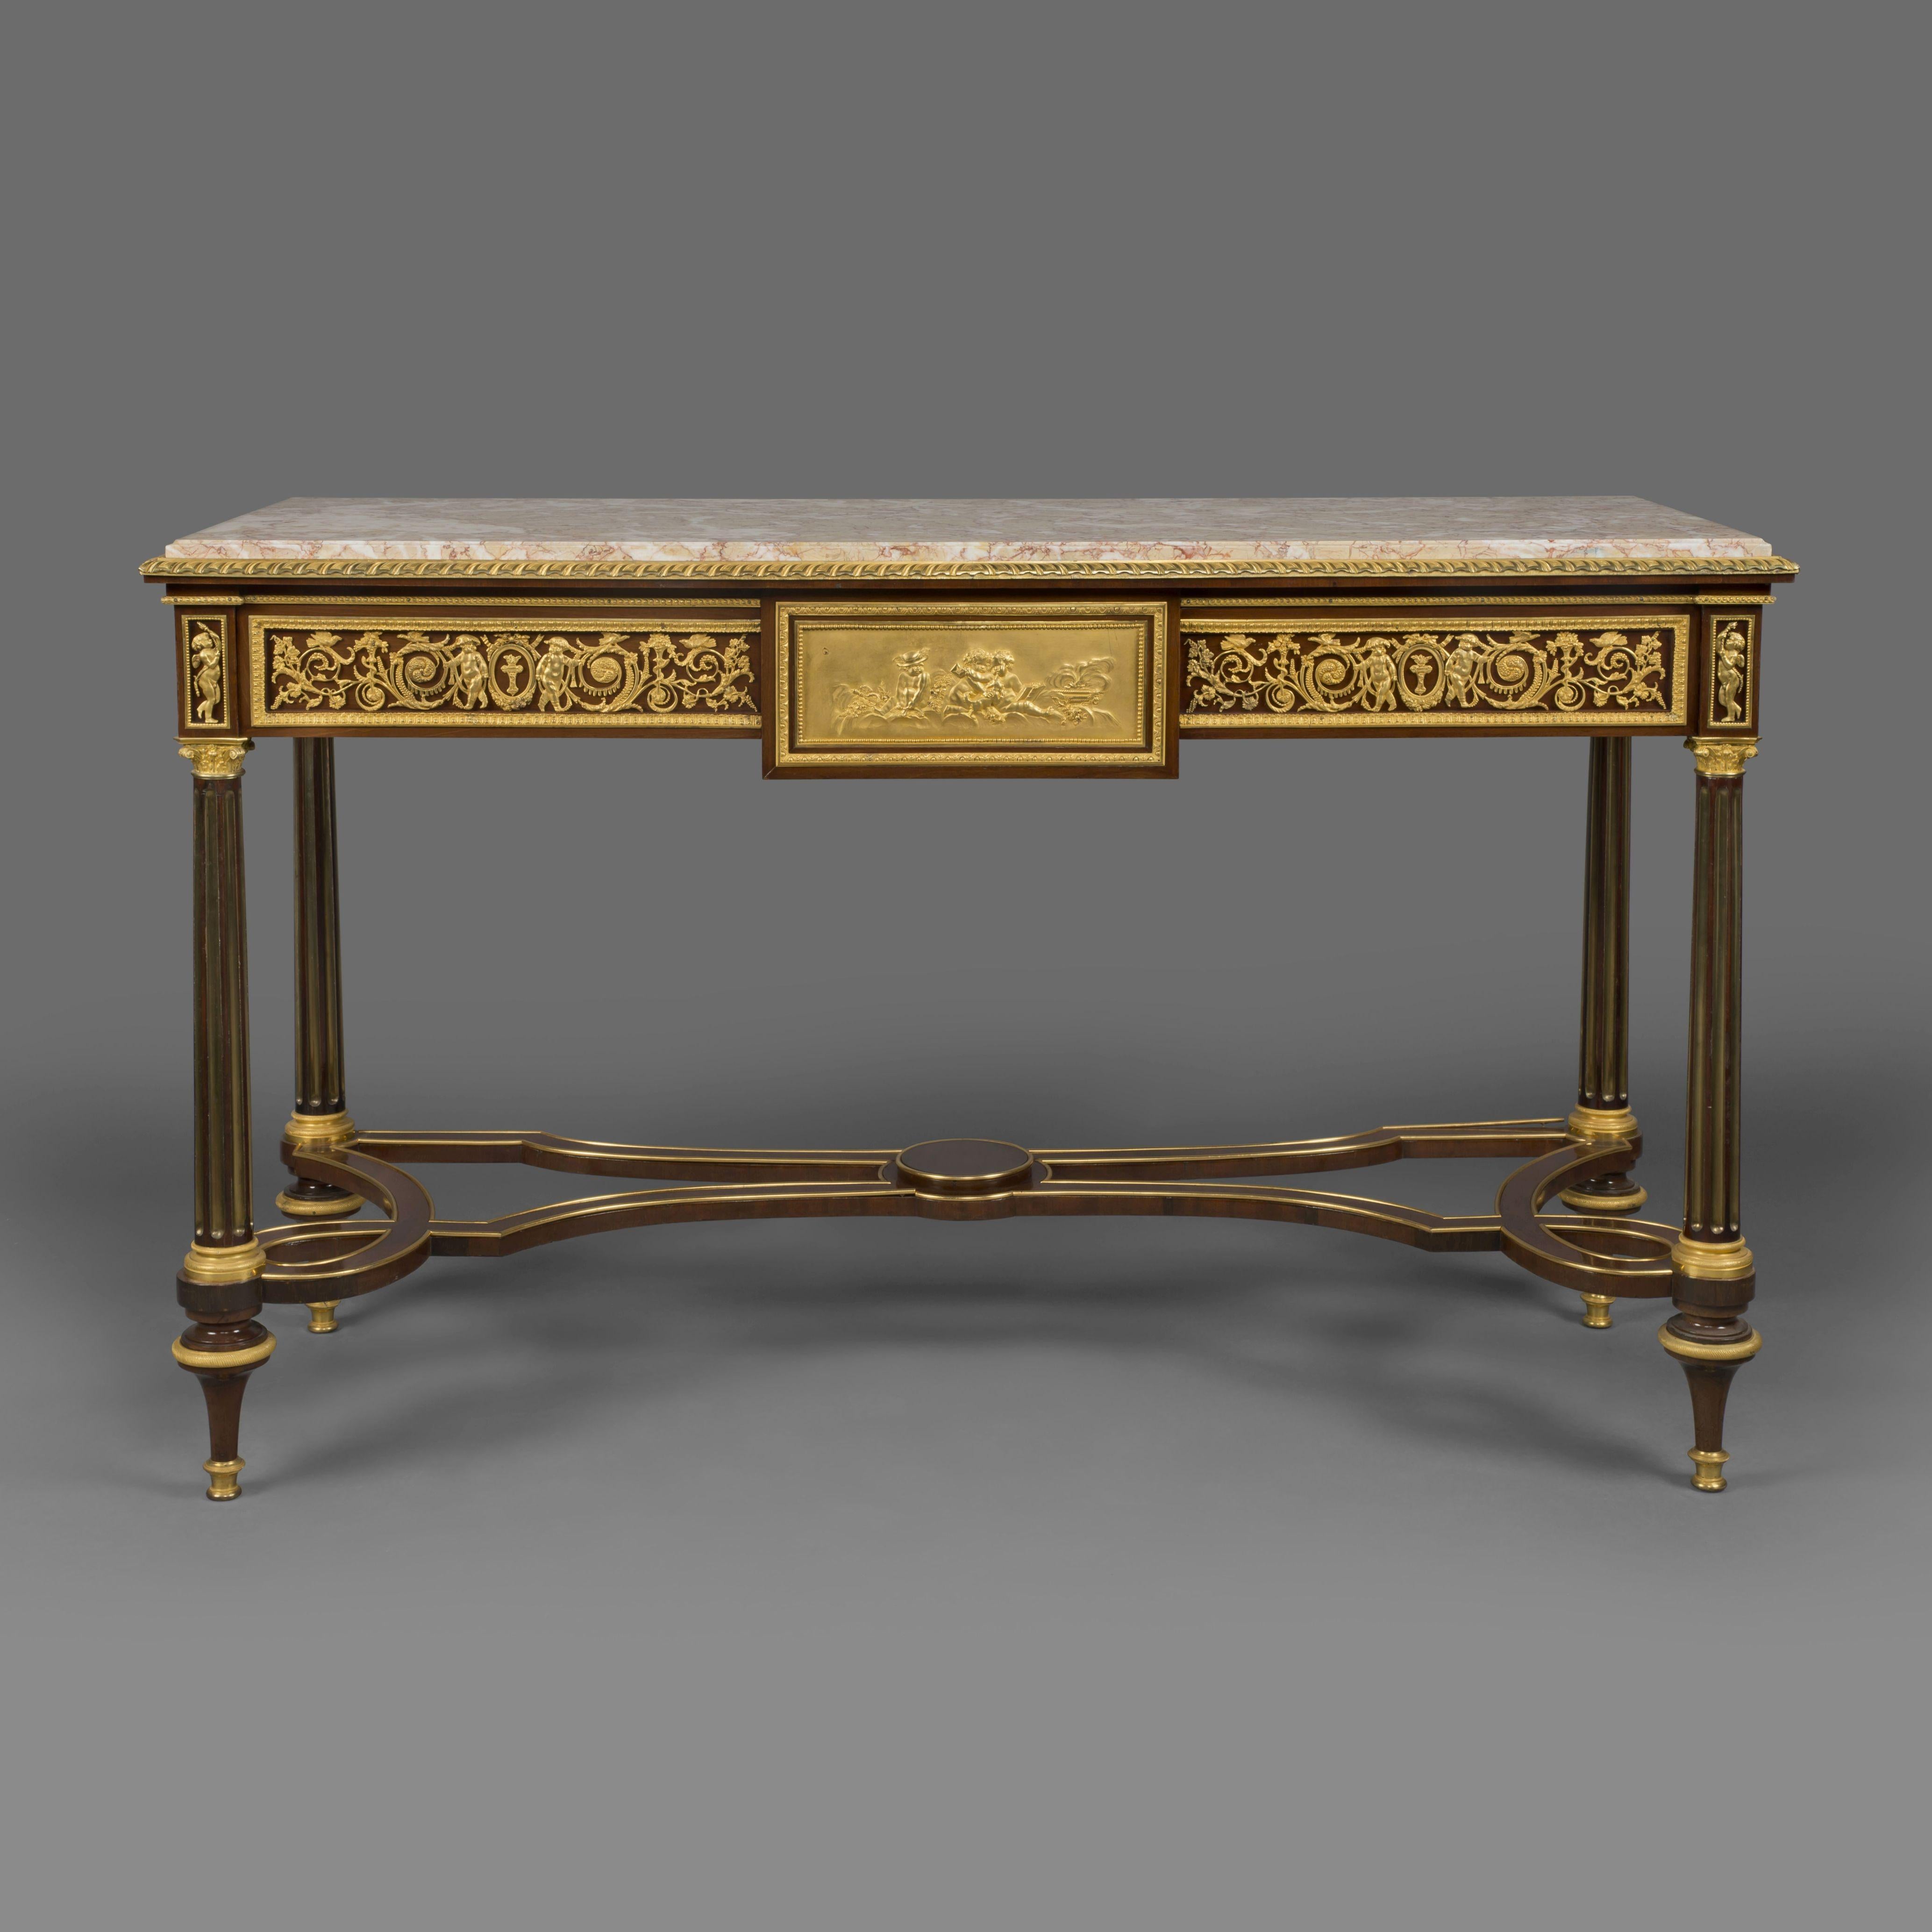 A fine pair of Louis XVI style gilt-bronze mounted mahogany console tables, in the manner of Adam Weisweiler.

Each table has a rectangular with fleur de pecher marble top above three drawers with a scrolling foliate frieze, the tables are raised